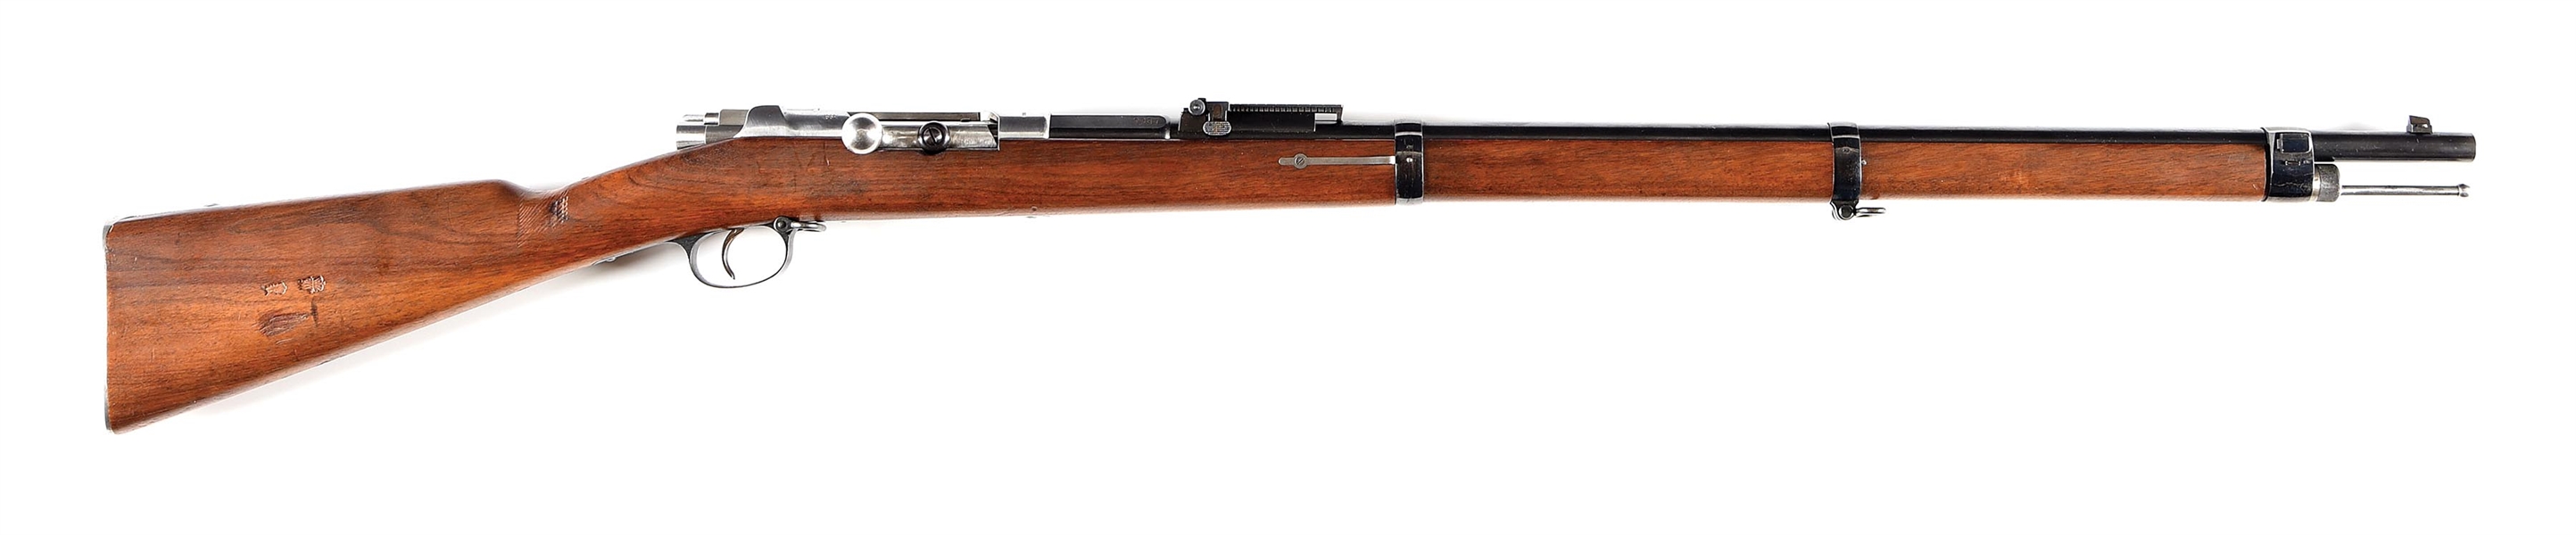 (A) ABSOLUTELY STUNNING, MUSEUM QUALITY, 3-DIGIT SERIAL NUMBER & UNIT MARKED SPANDAU ARSENAL MODEL 71/84 BOLT ACTION RIFLE.